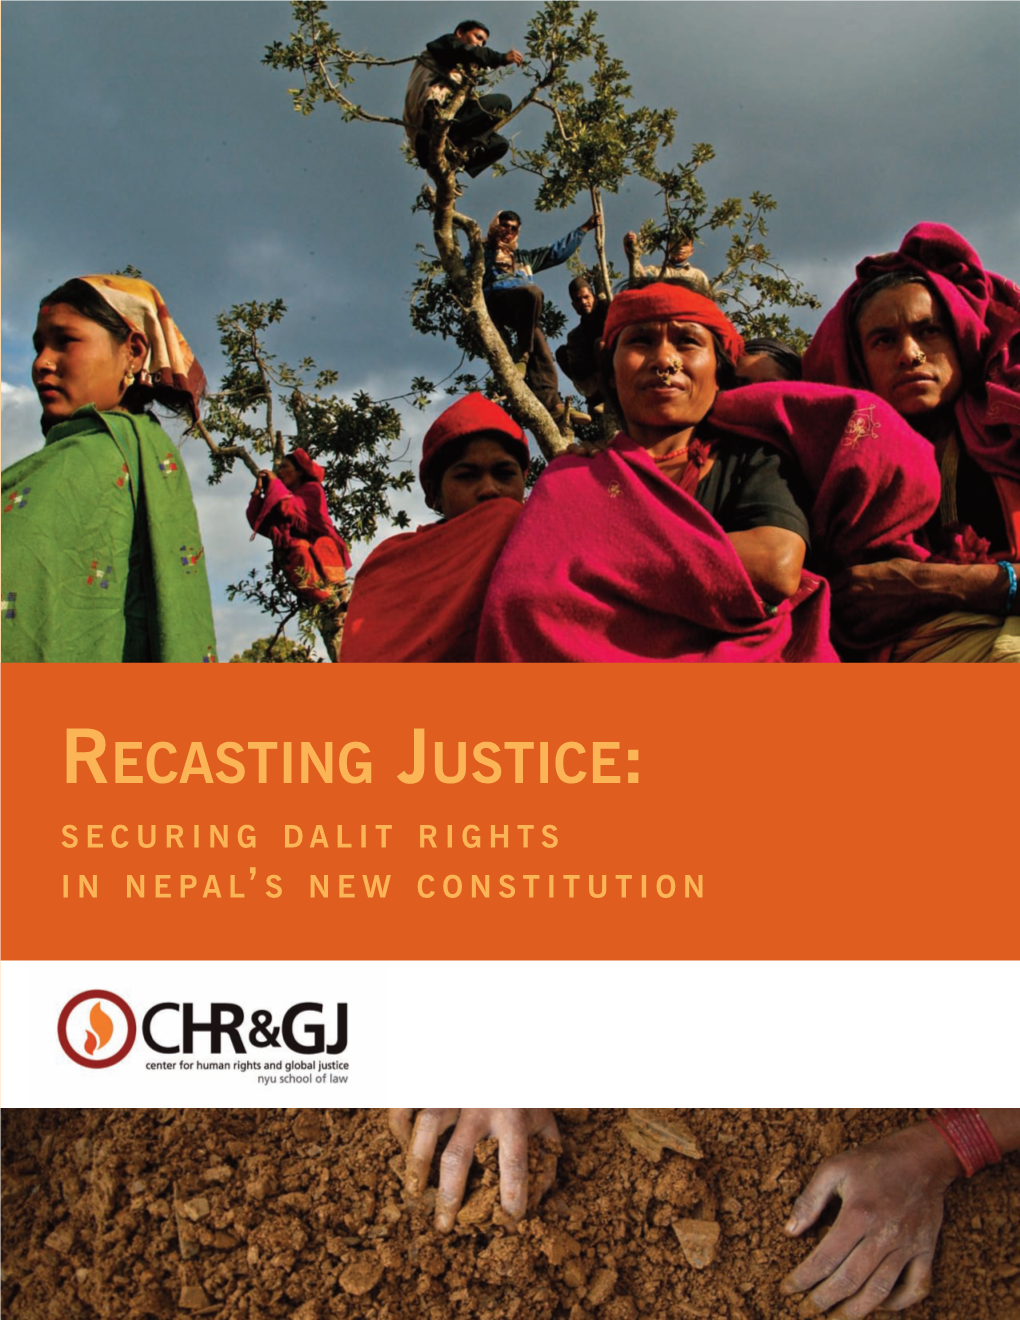 Recasting Justice: Securing Dalit Rights in Nepal's New